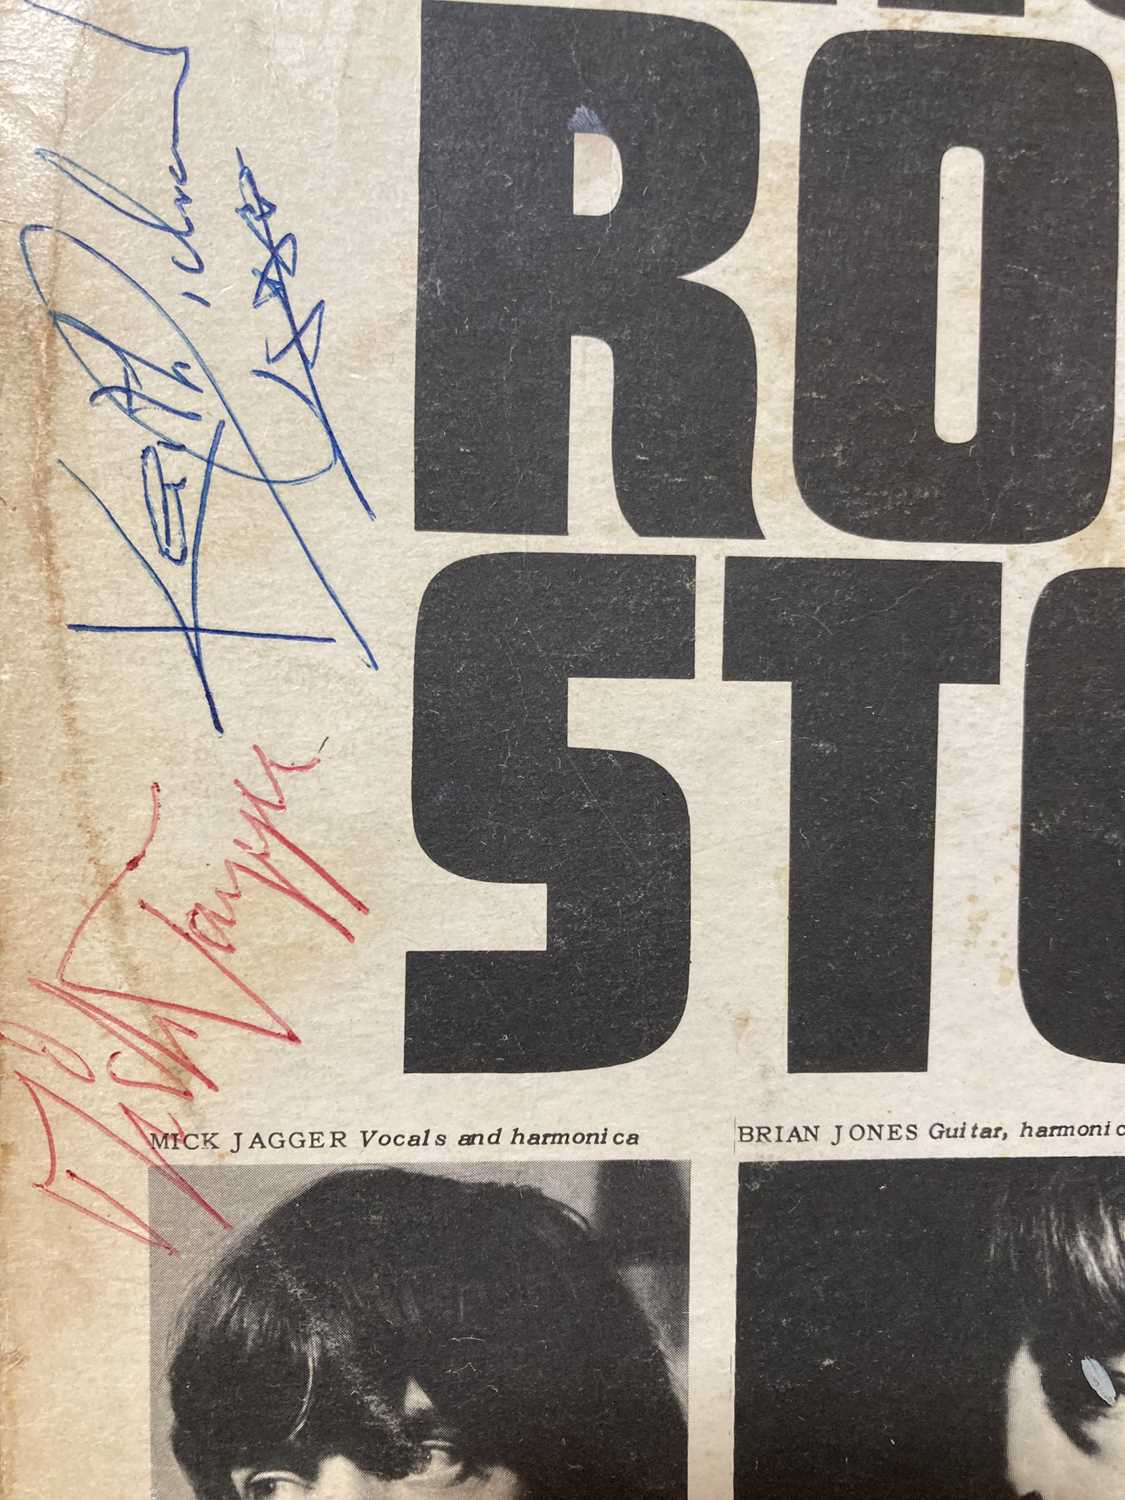 THE ROLLING STONES - FULLY SIGNED LP. - Image 7 of 8